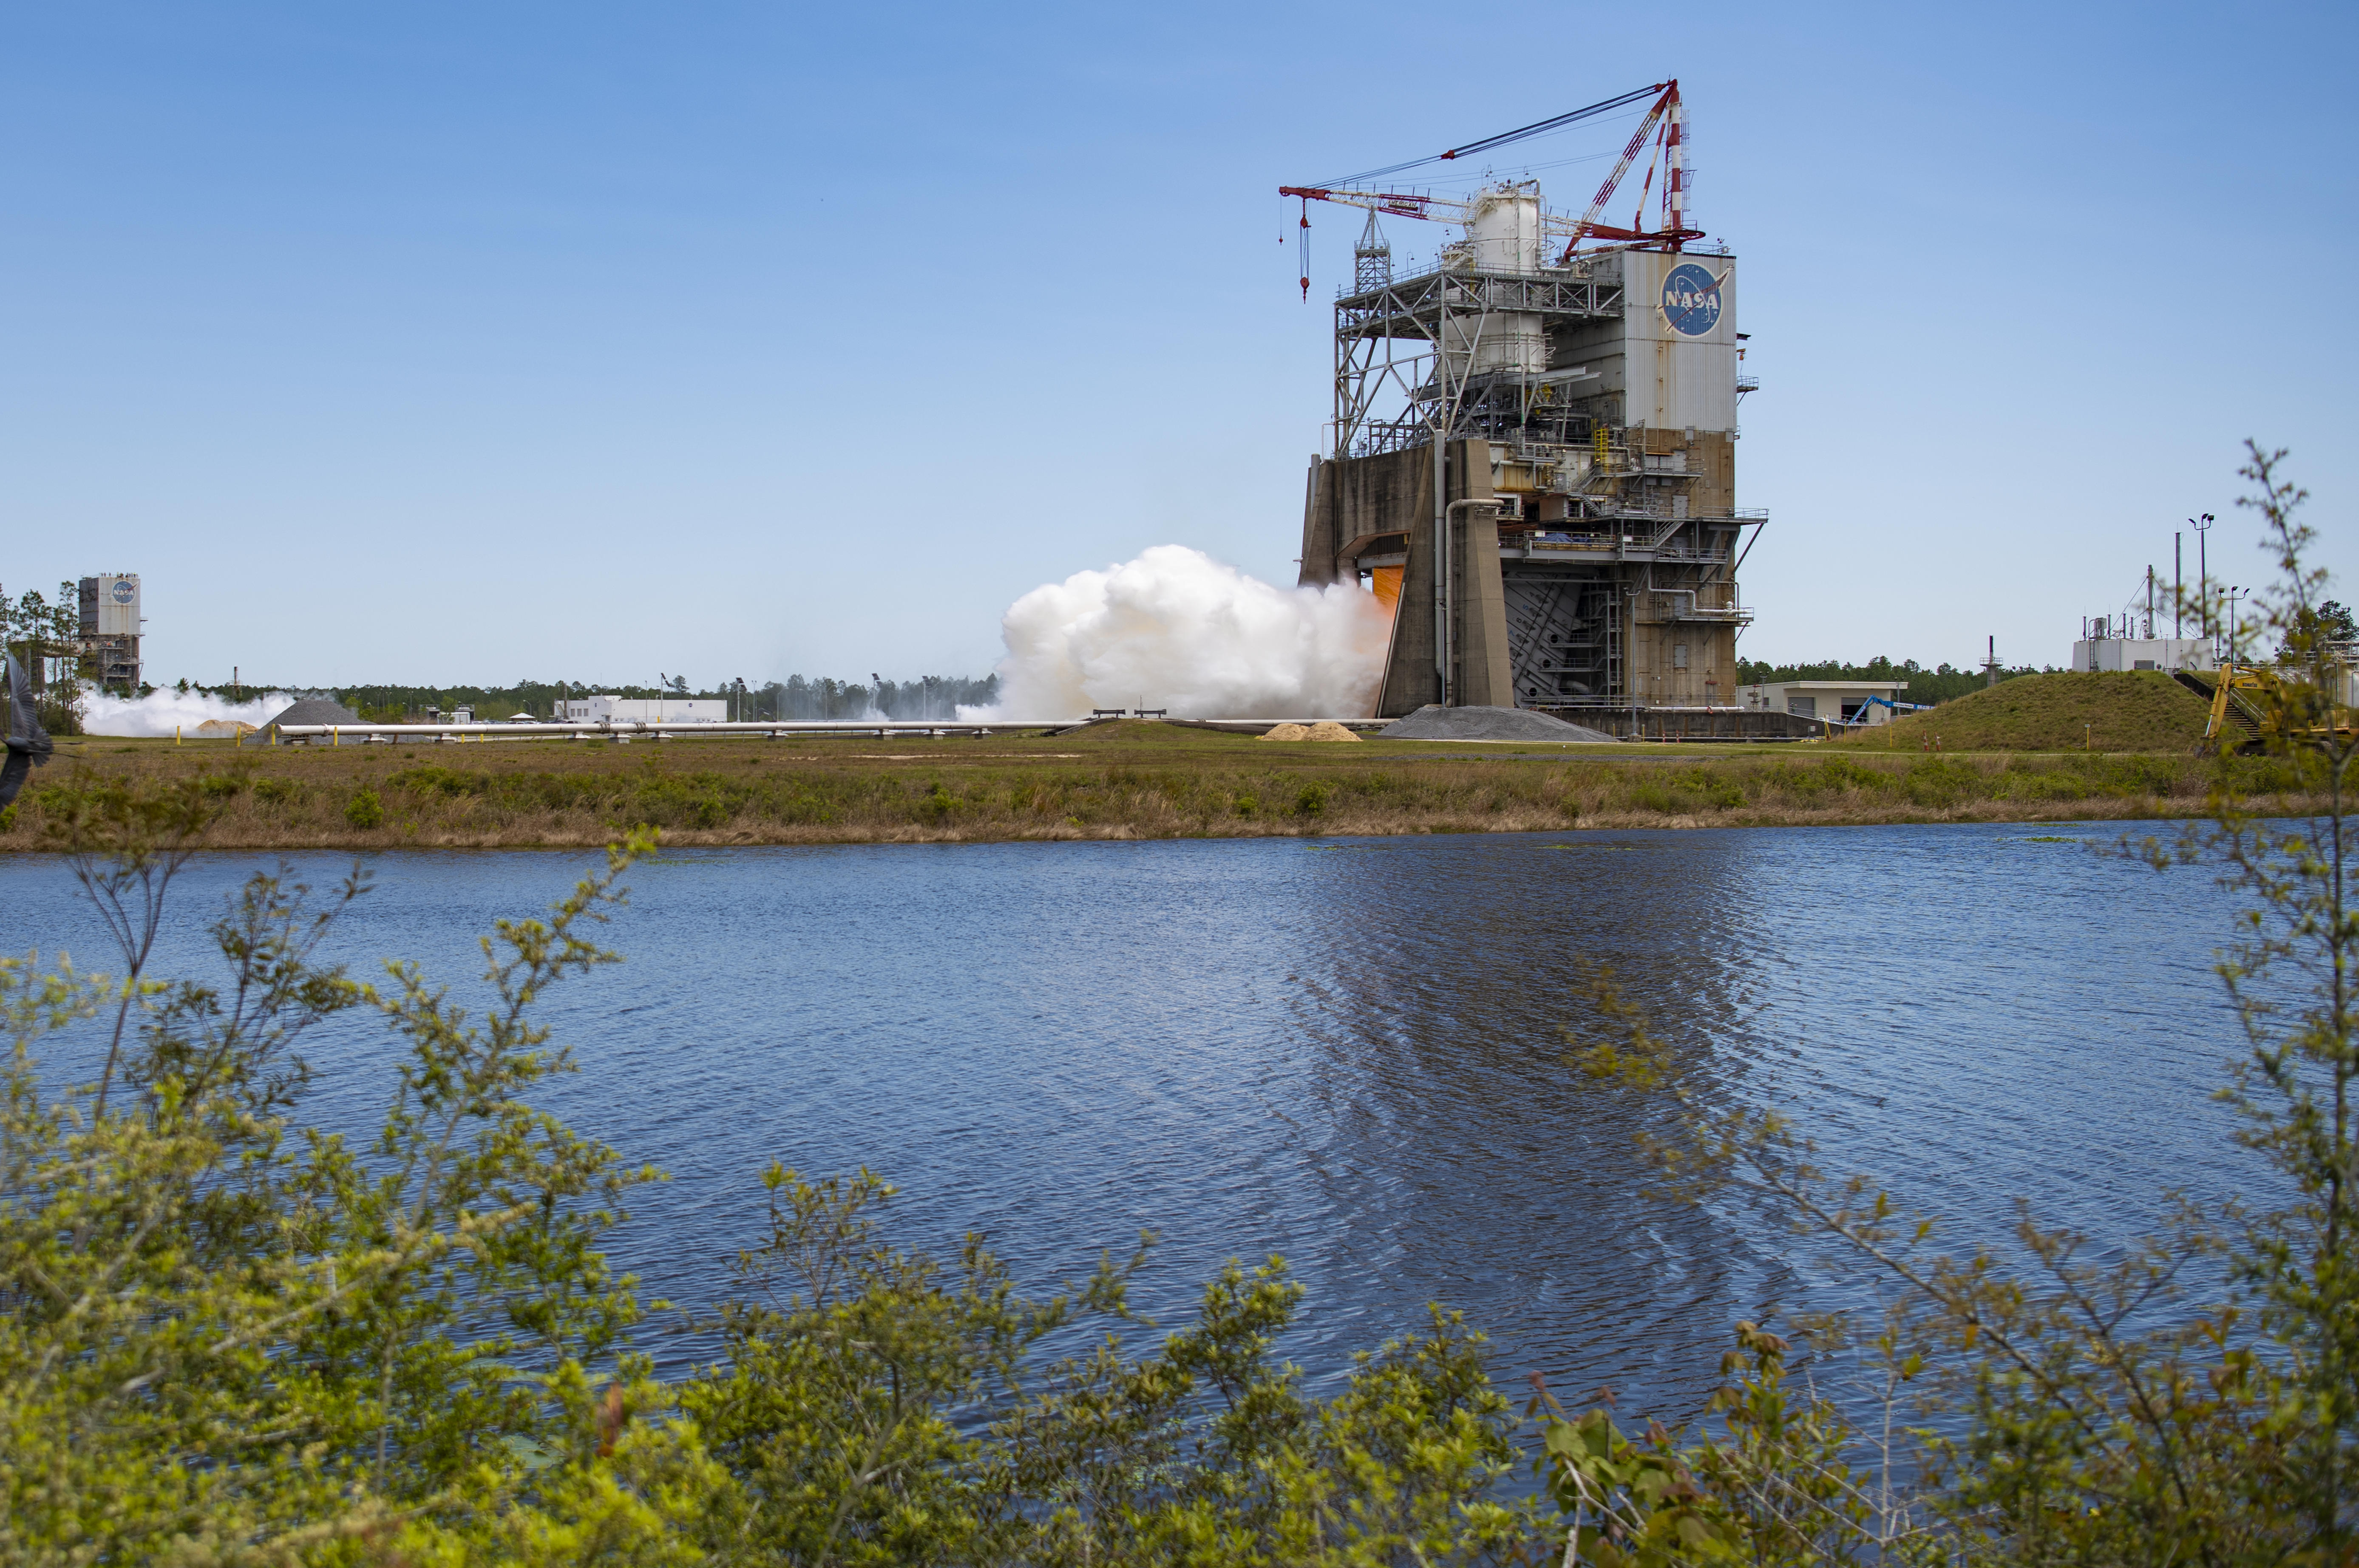 a hot fire begins on the RS-25 engine as seen across the canal